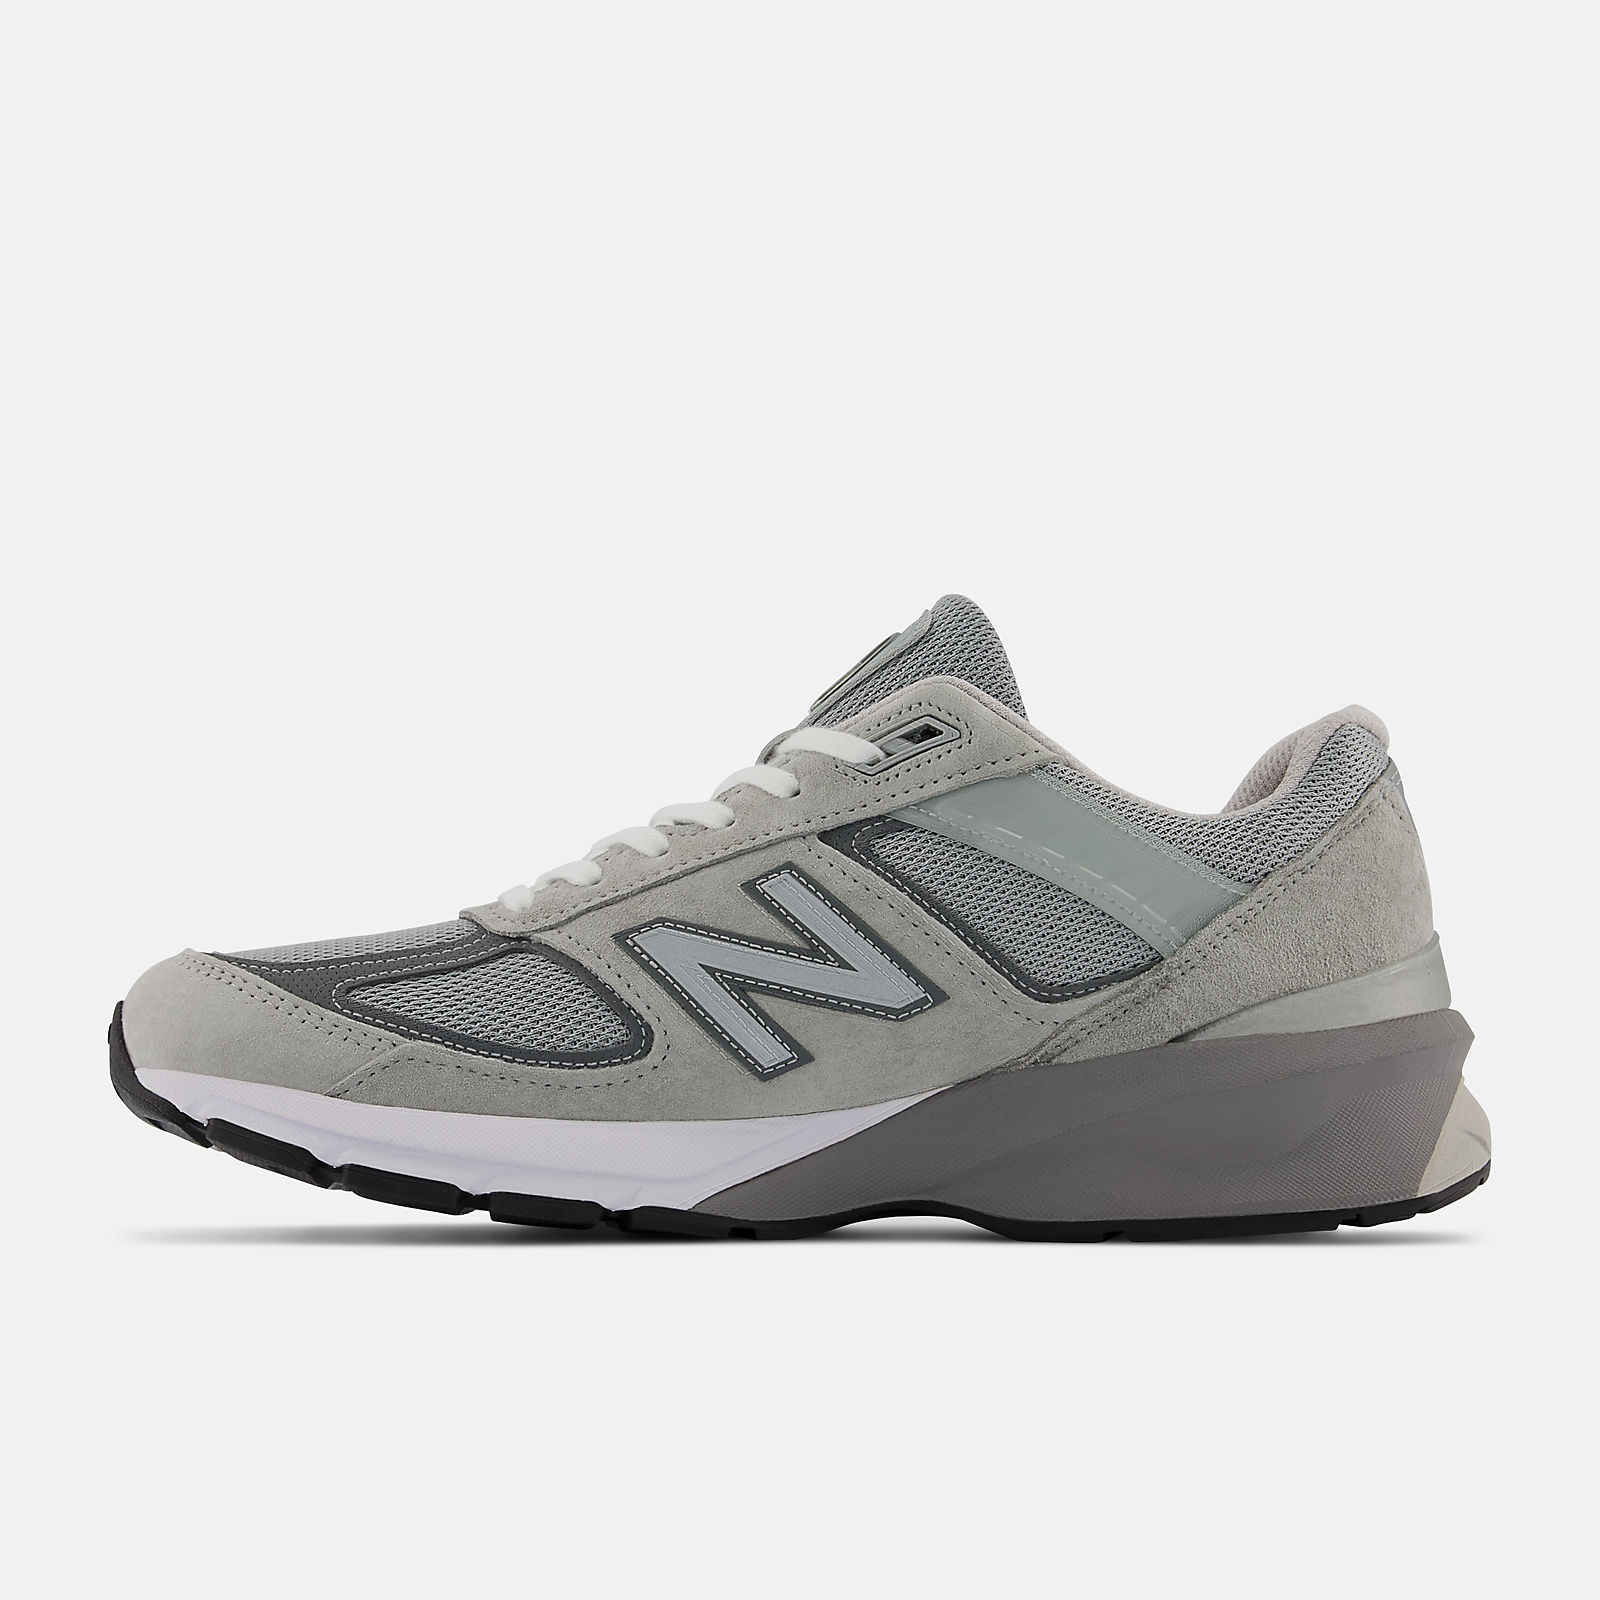 Minimal Flatter Email MADE in USA 990v5 Core - New Balance